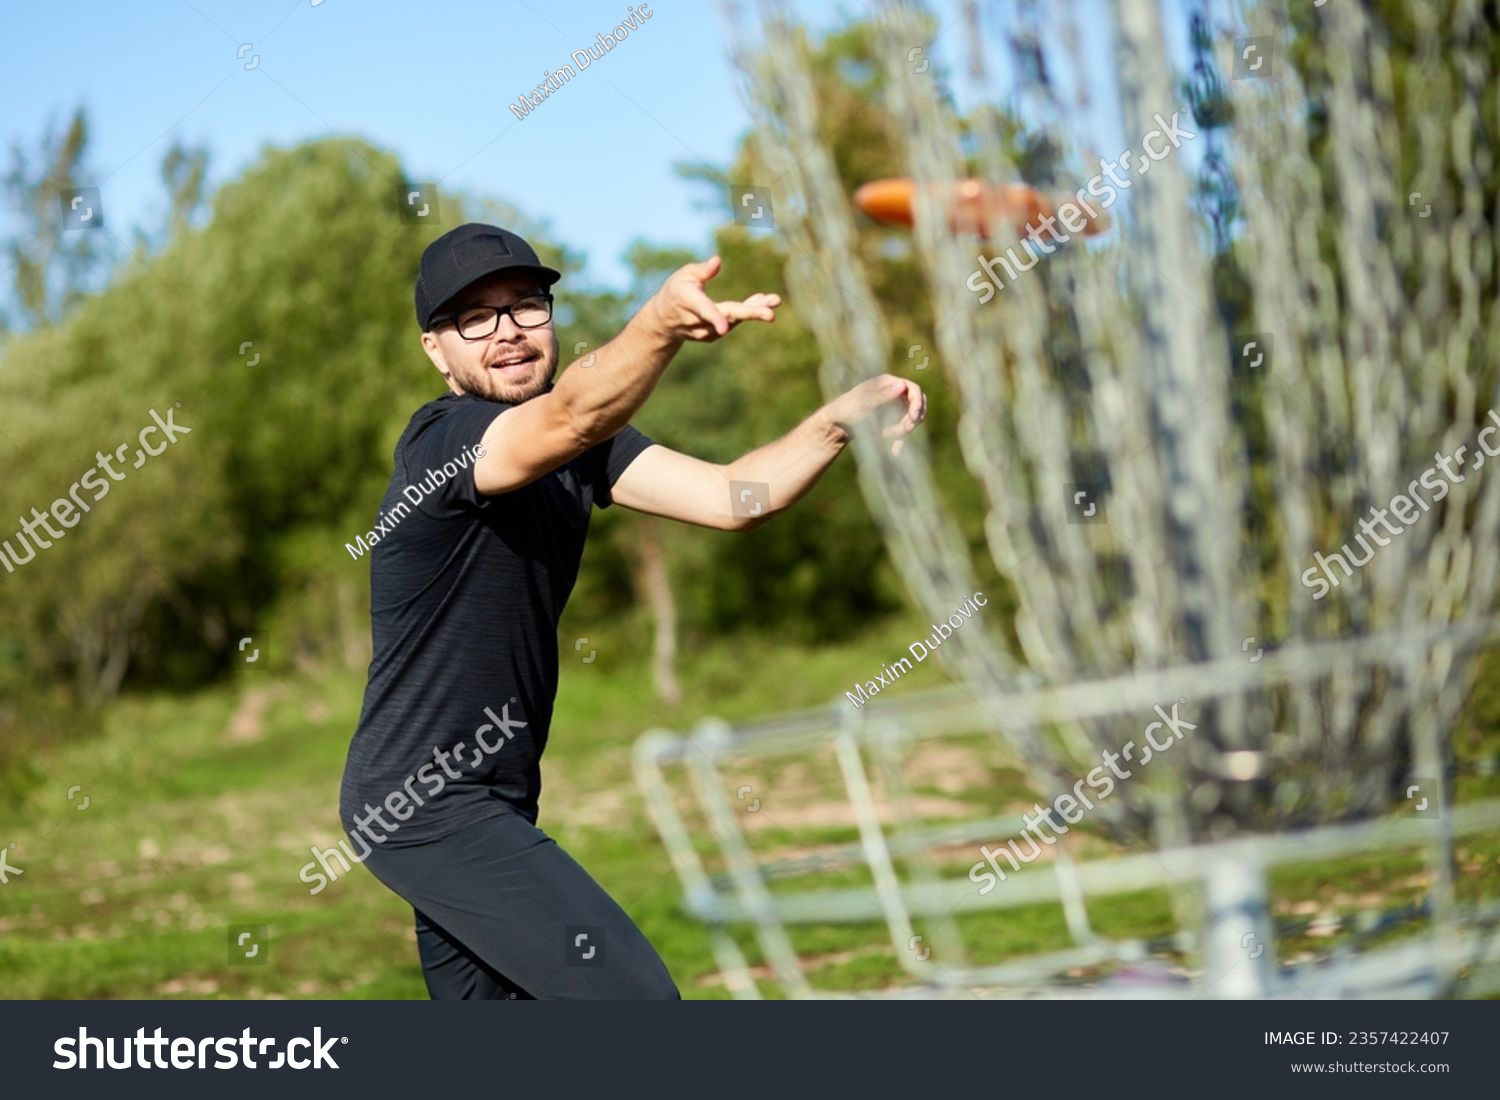 Man is throwing disc to the basket in disc golf #2357422407